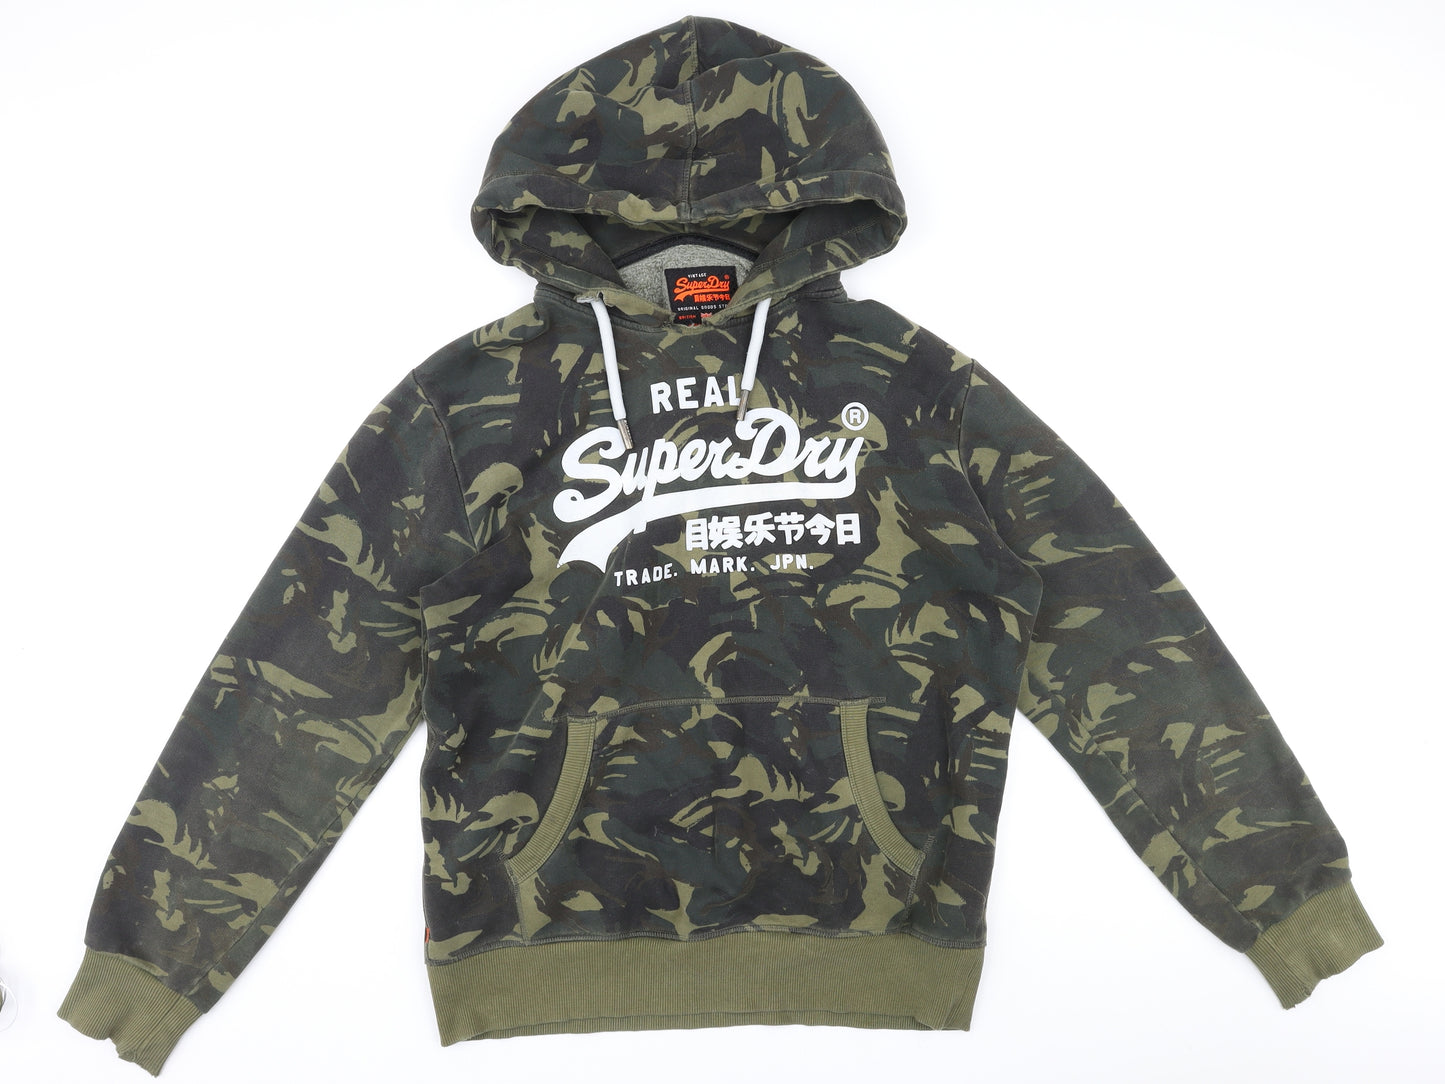 Superdry Mens Green Camouflage Cotton Pullover Hoodie Size XL - Logo, Pocket, Drawstring